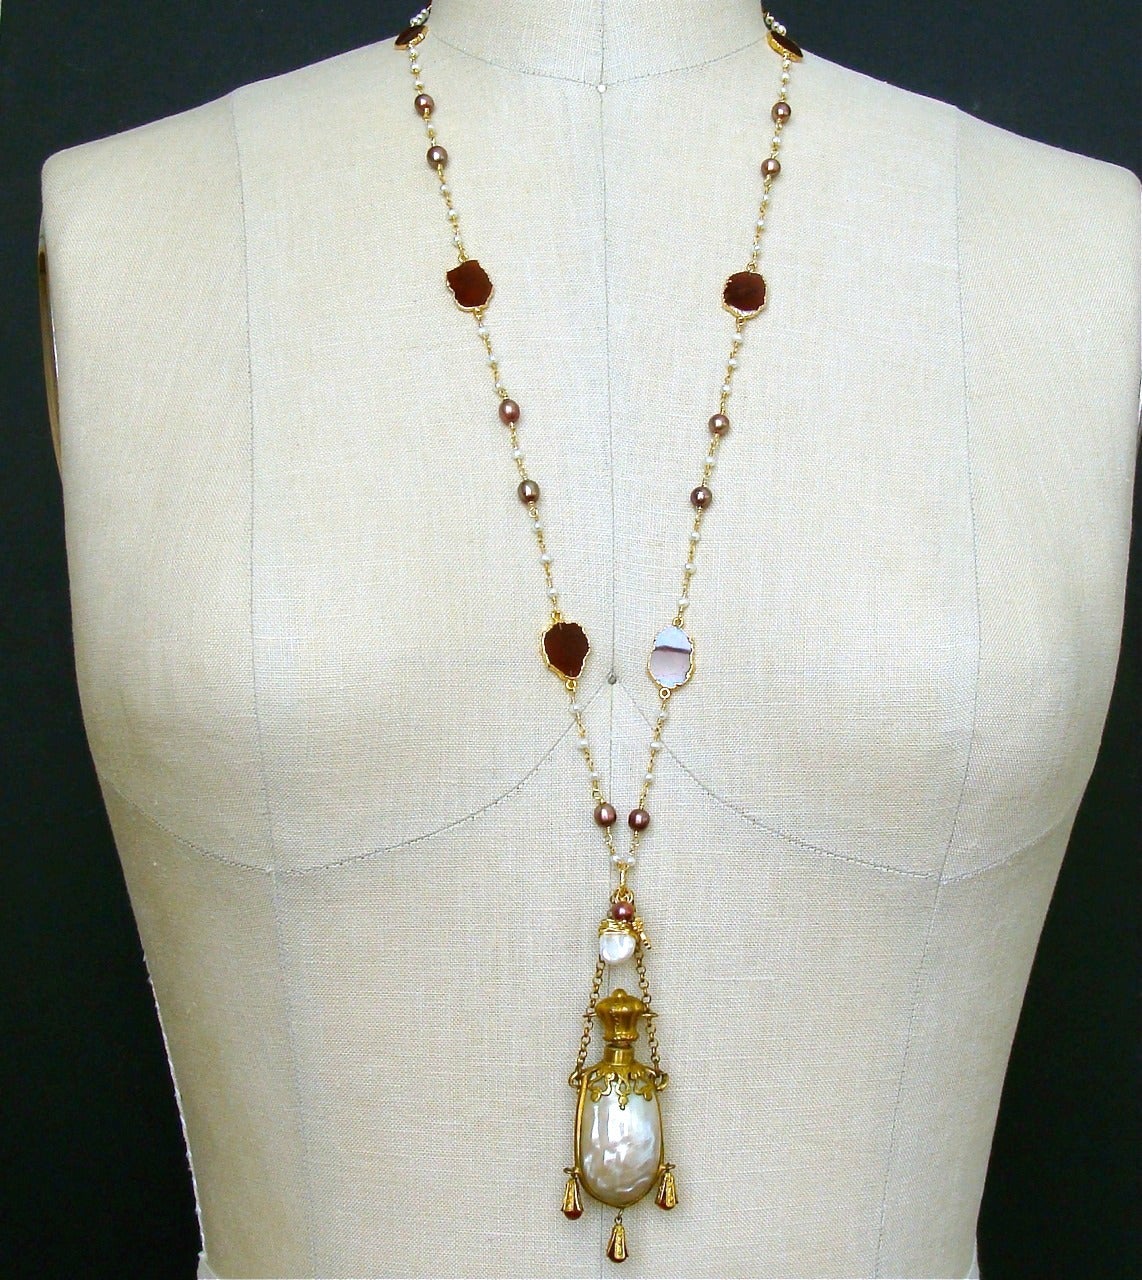 Women's Garnet Slices Pearls Chatelaine Shell Scent Bottle Necklace